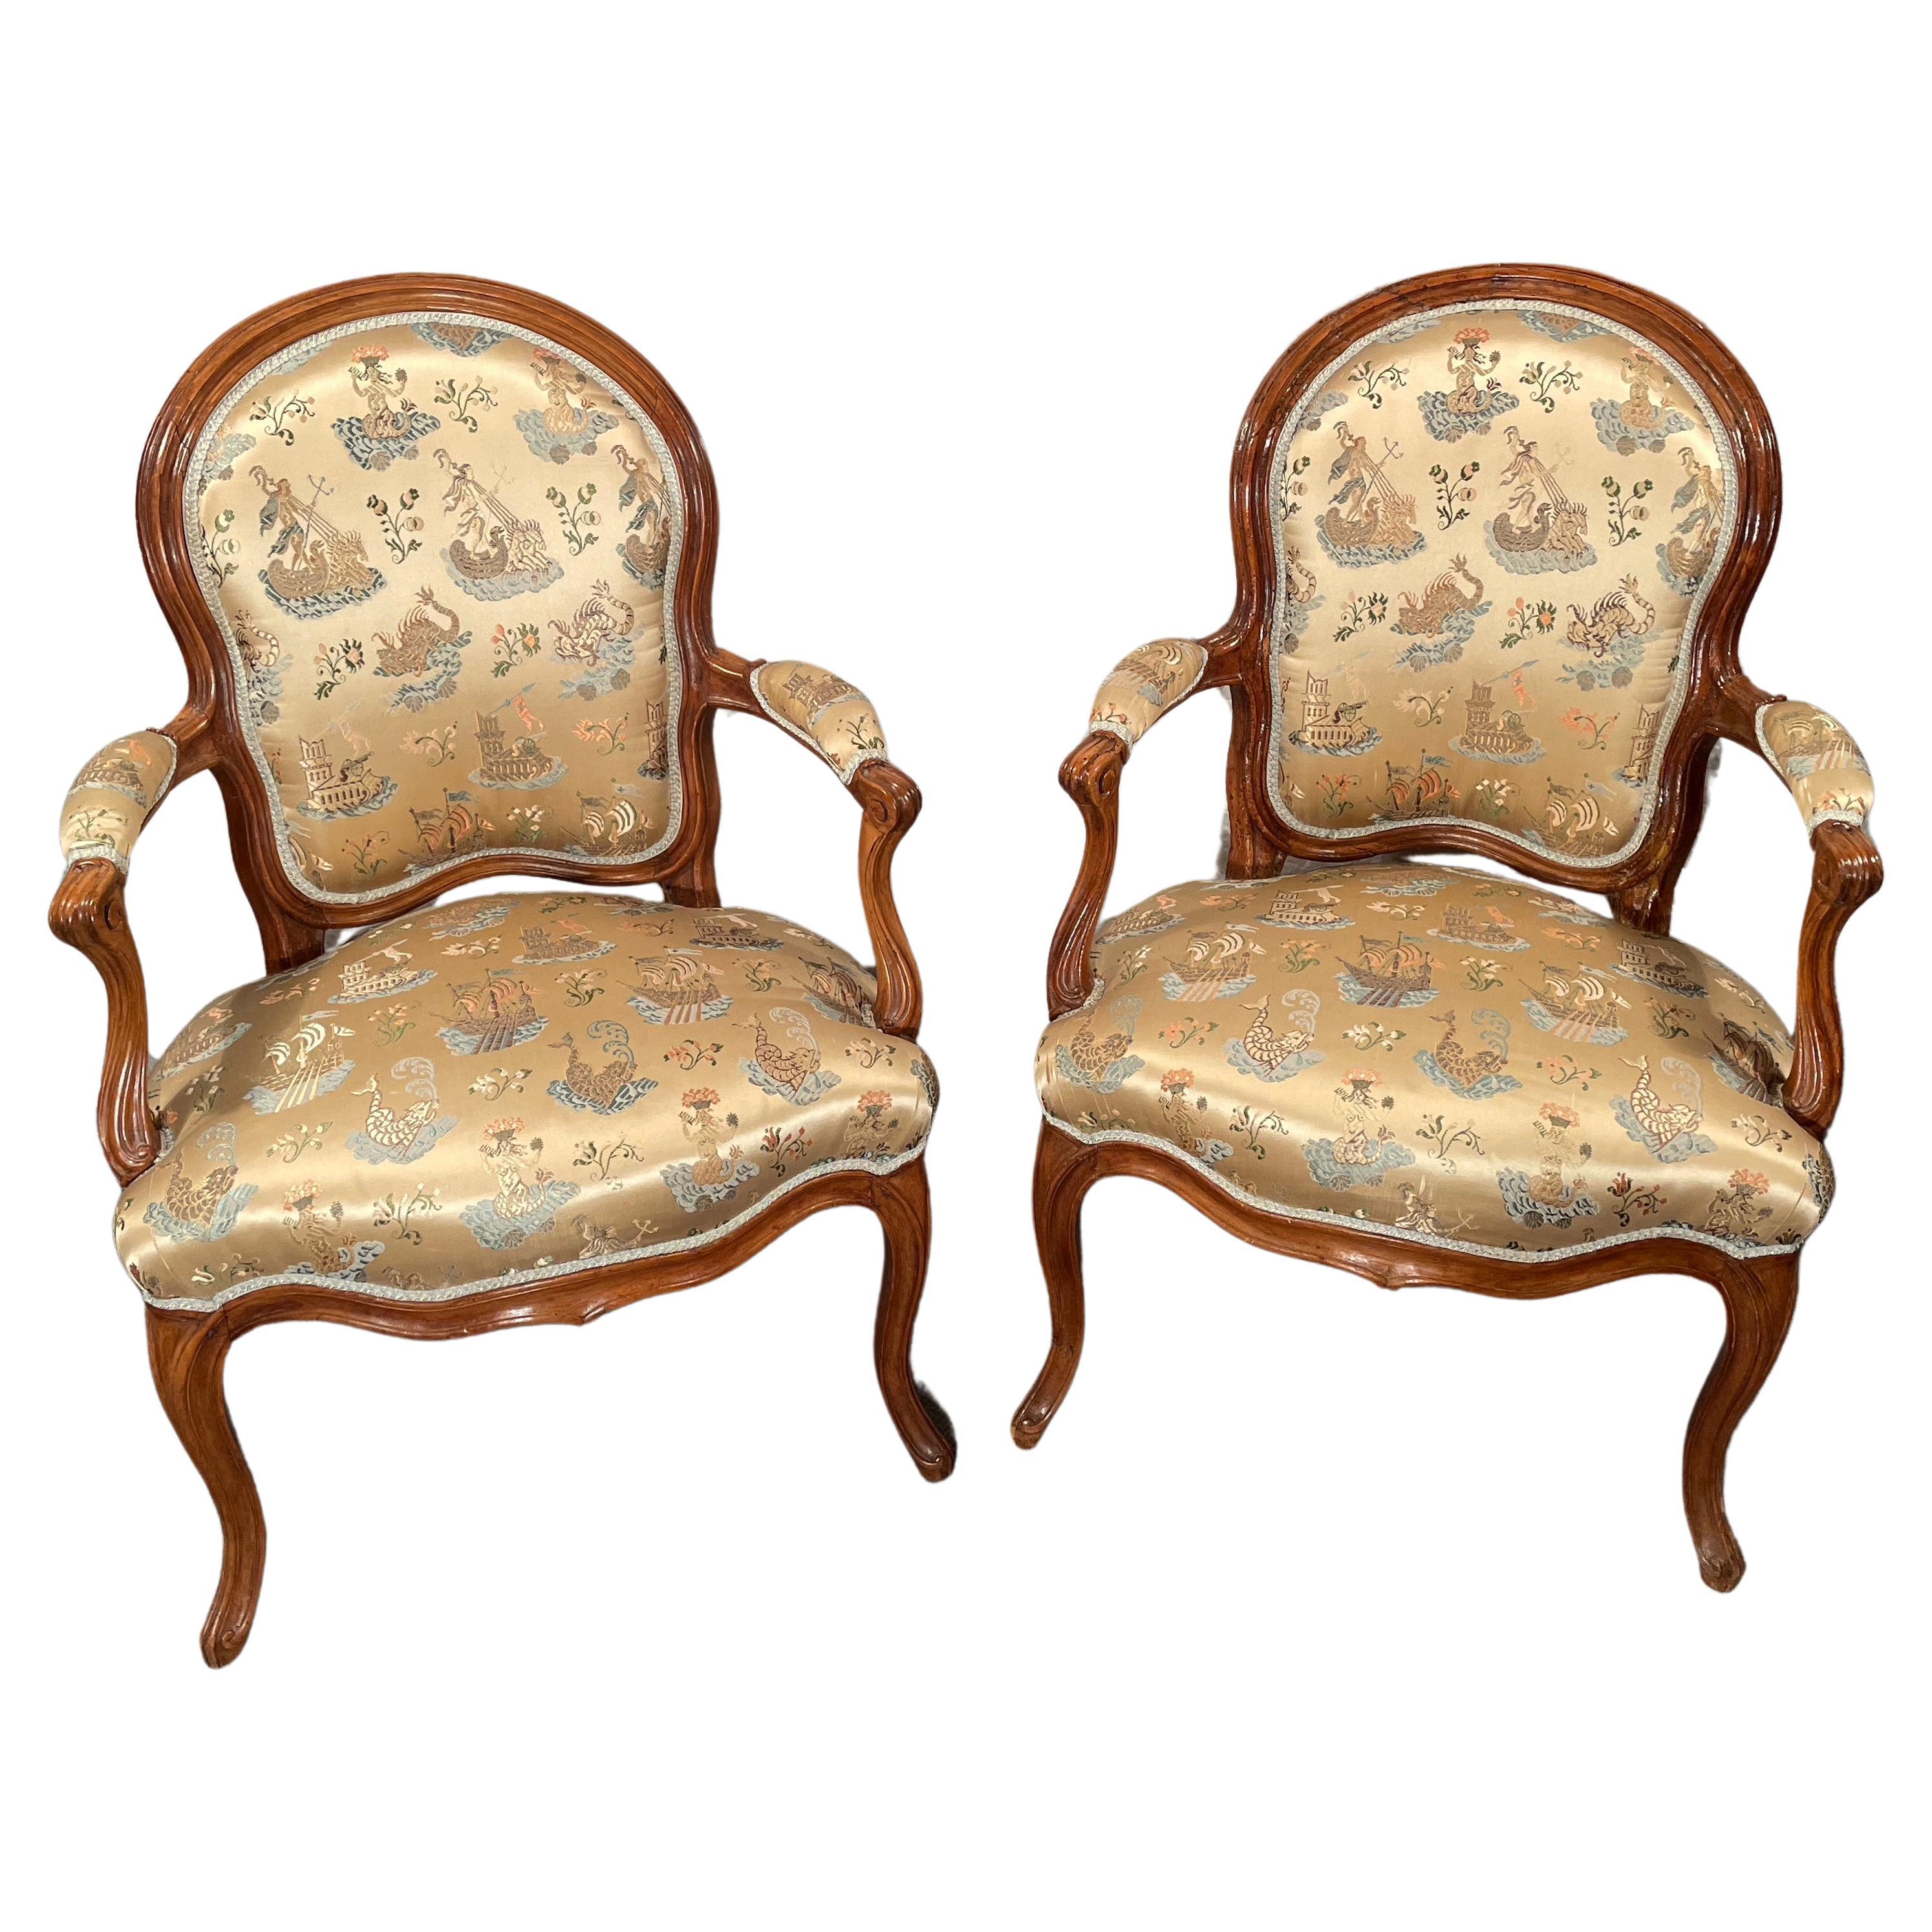 Pair of 18th century Louis XV Armchairs, France 1760